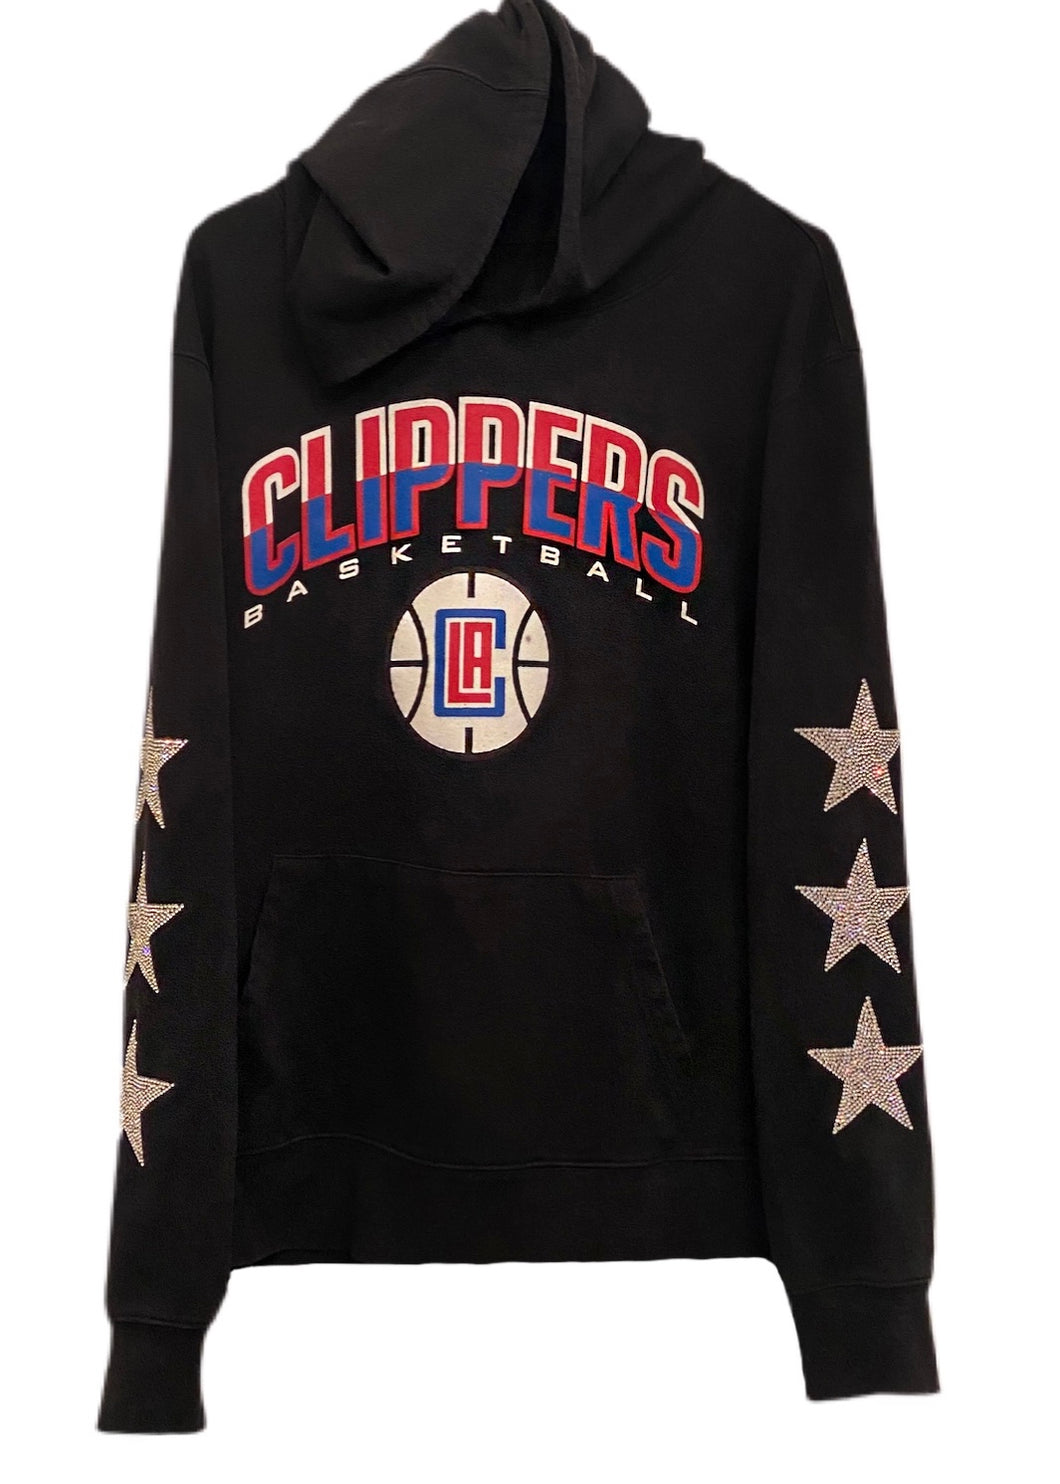 LA Clippers, NBA One of a KIND Vintage Hoodie with Three Crystal Star Design